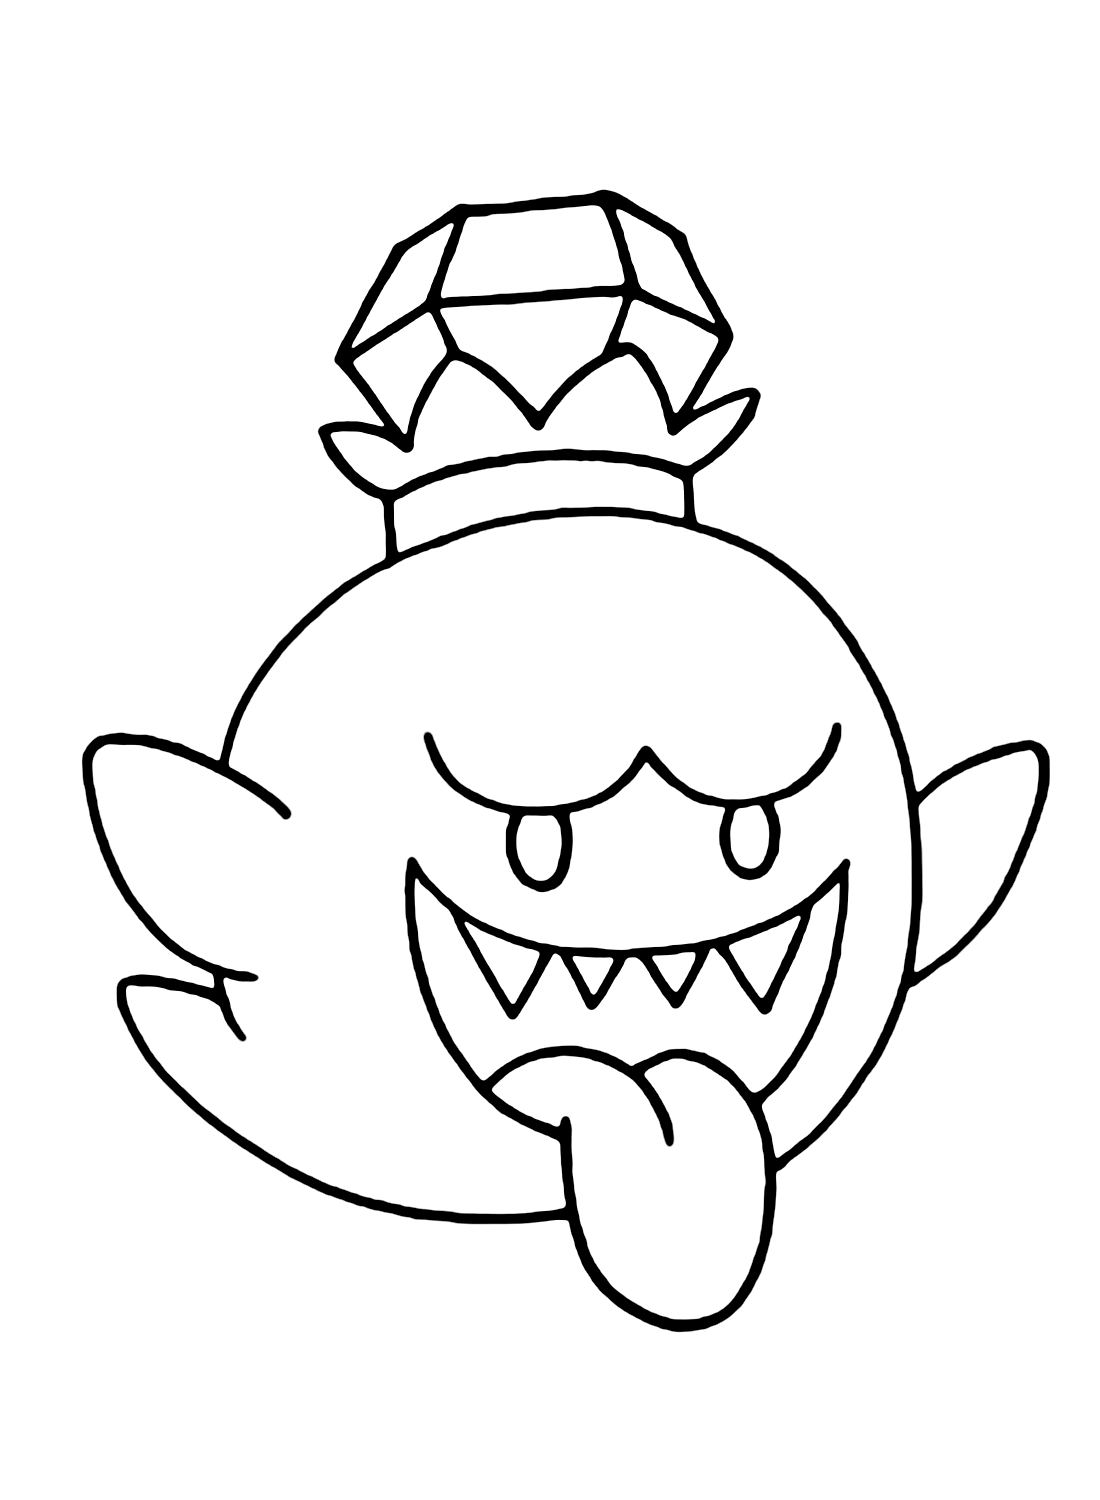 King Boo color Sheets Coloring Pages